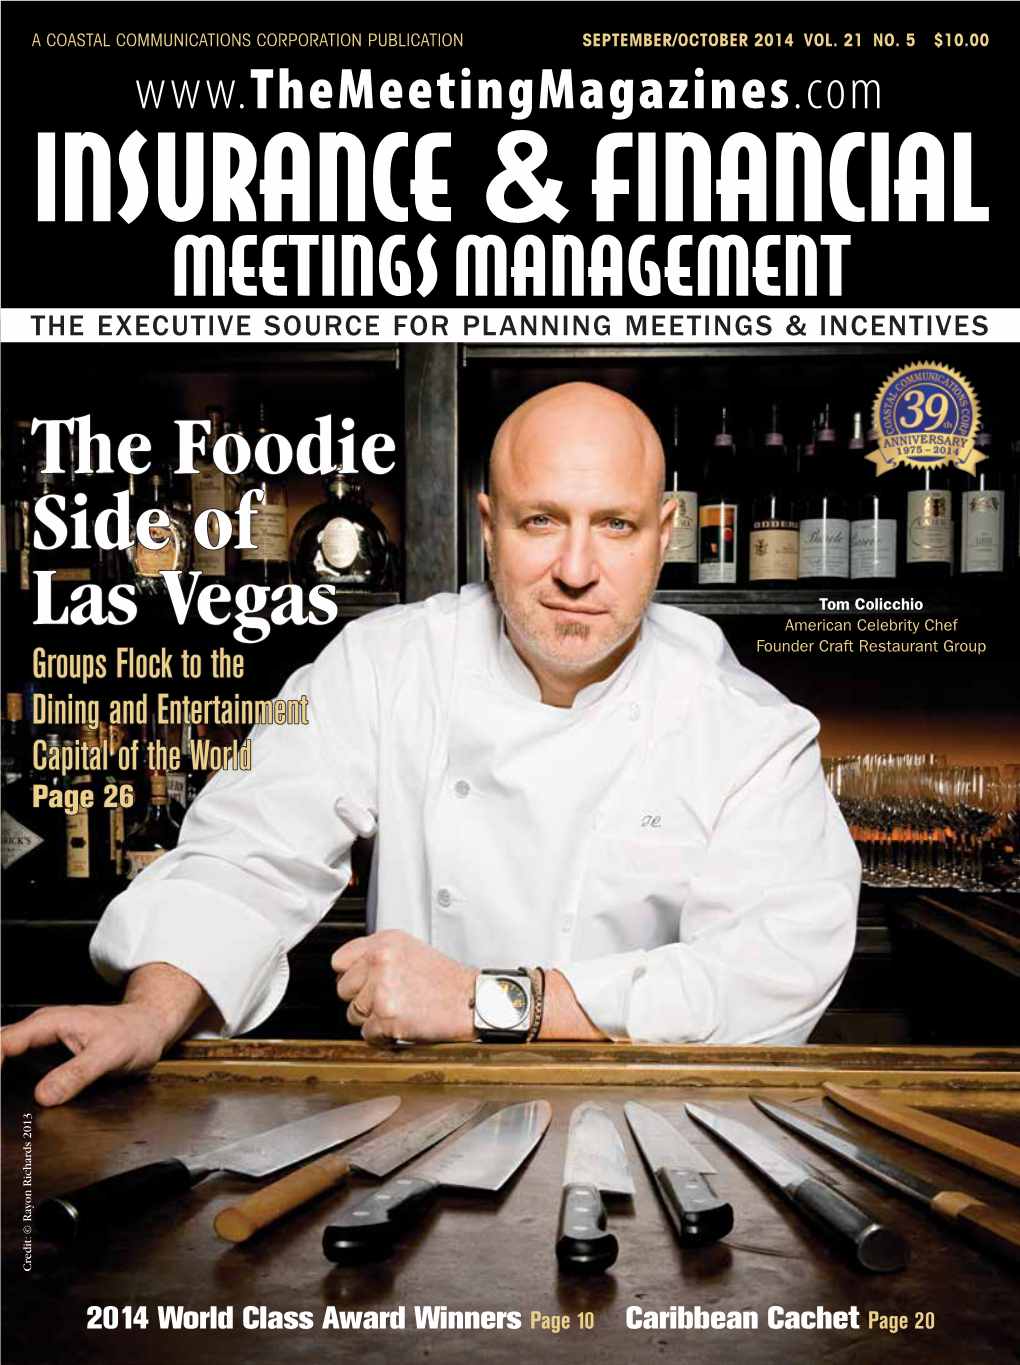 The Foodie Side of Las Vegas 34 CORPORATE LADDER Groups Flock to the Dining and Entertainment Capital of the World 34 READER SERVICES by Derek Reveron